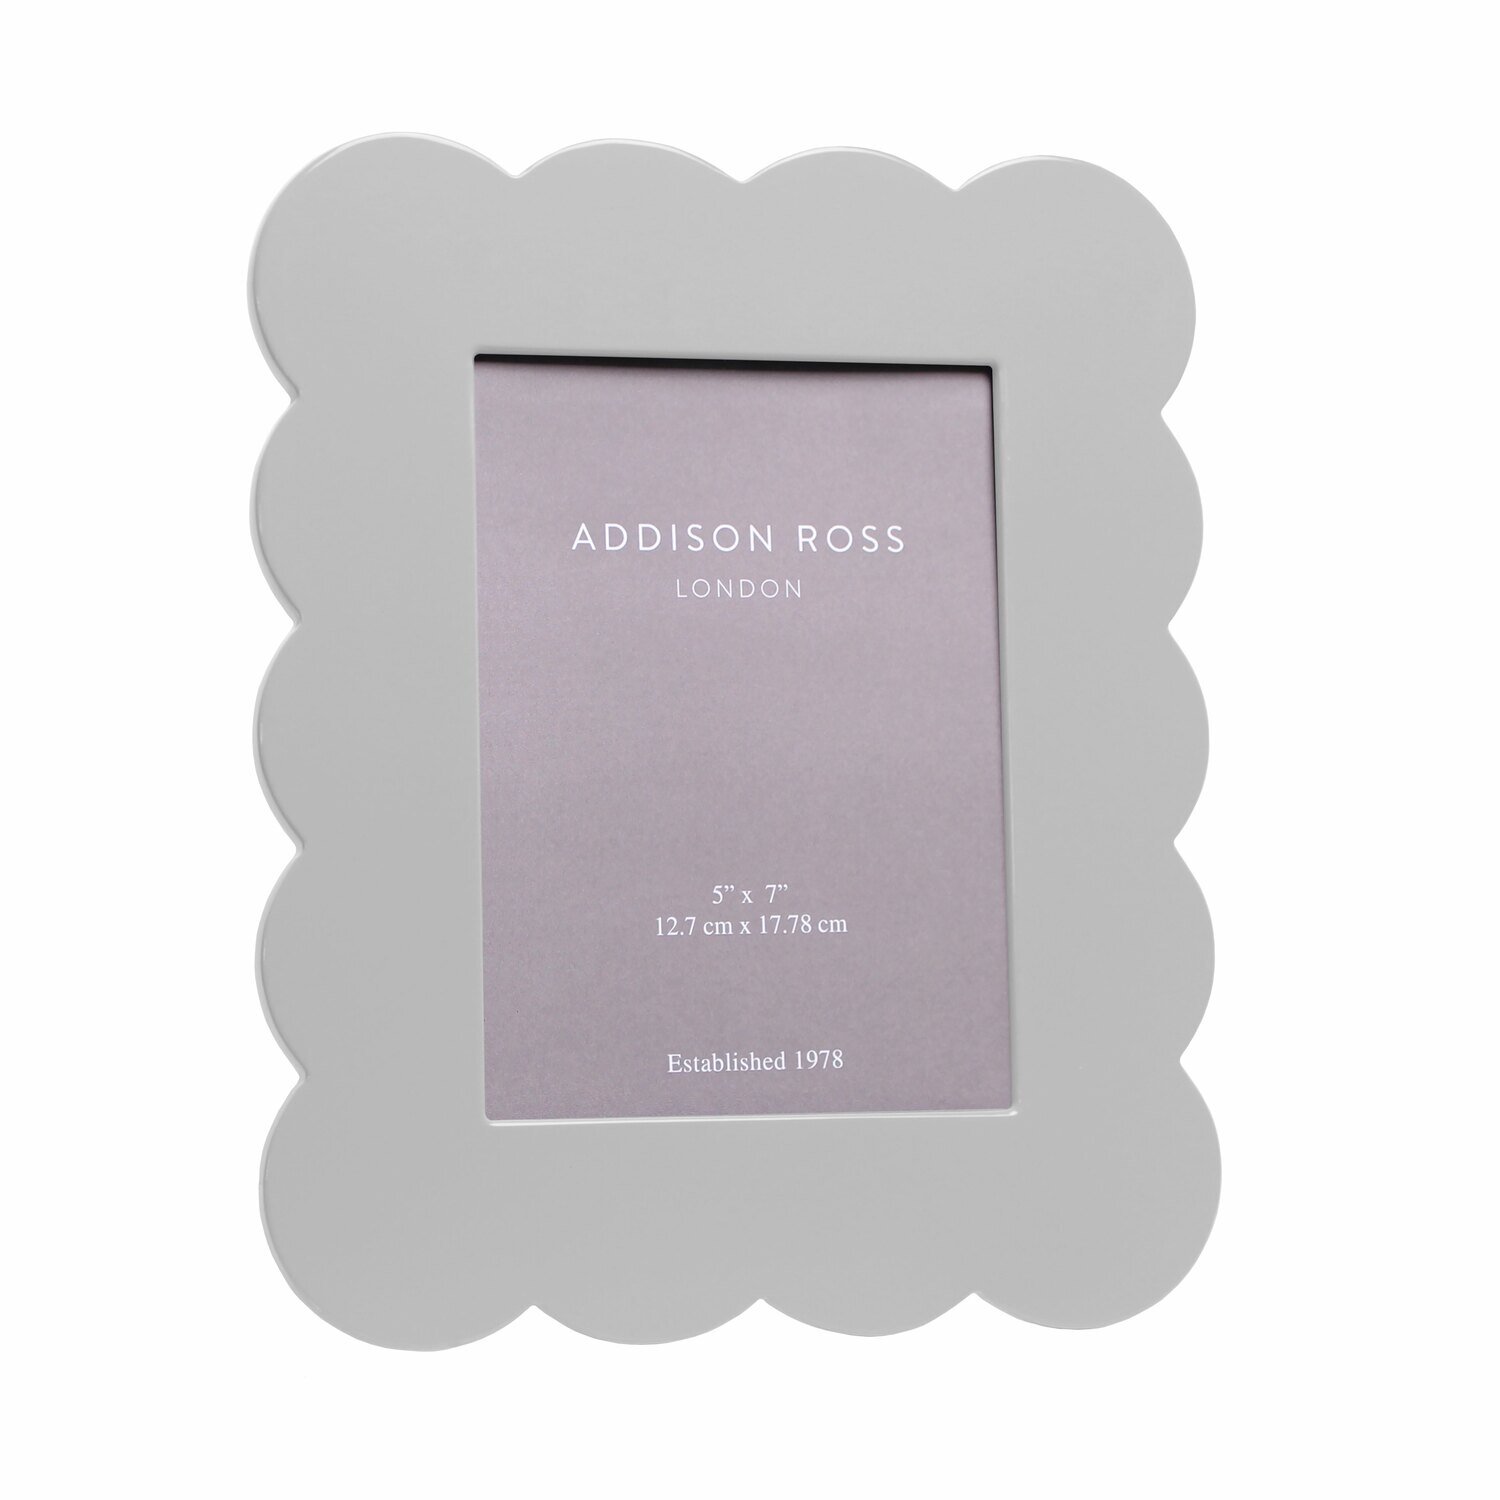 Addison Ross Chiffon Scalloped Lacquer Photo Frame 5 x 7 Inch Lacquer FR11001